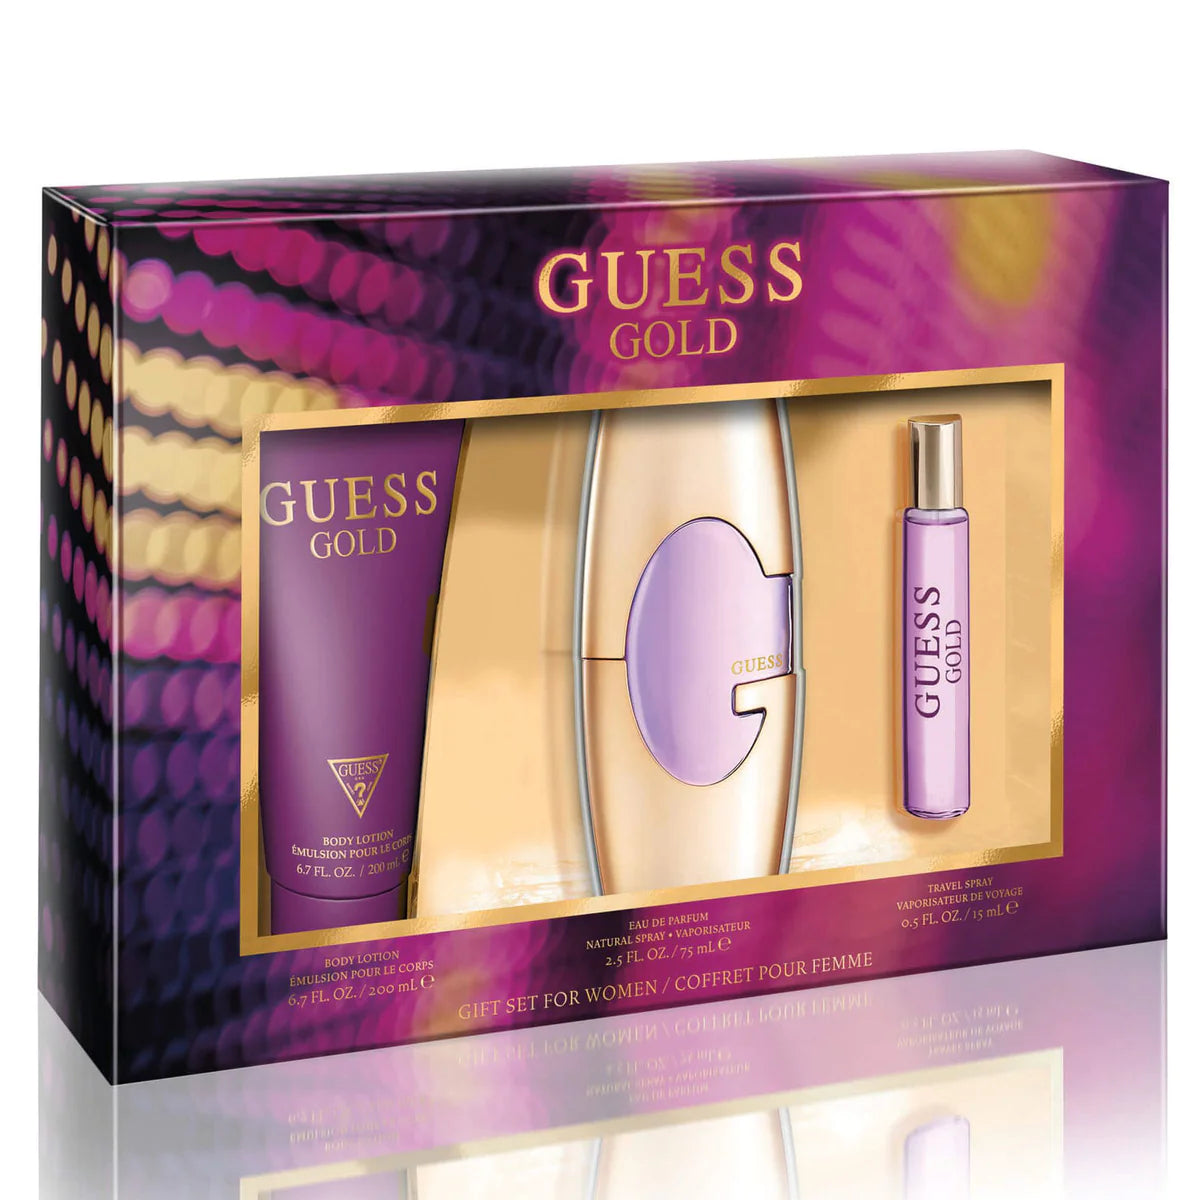 GUEES GOLD GIFT SET FOR WOMEN